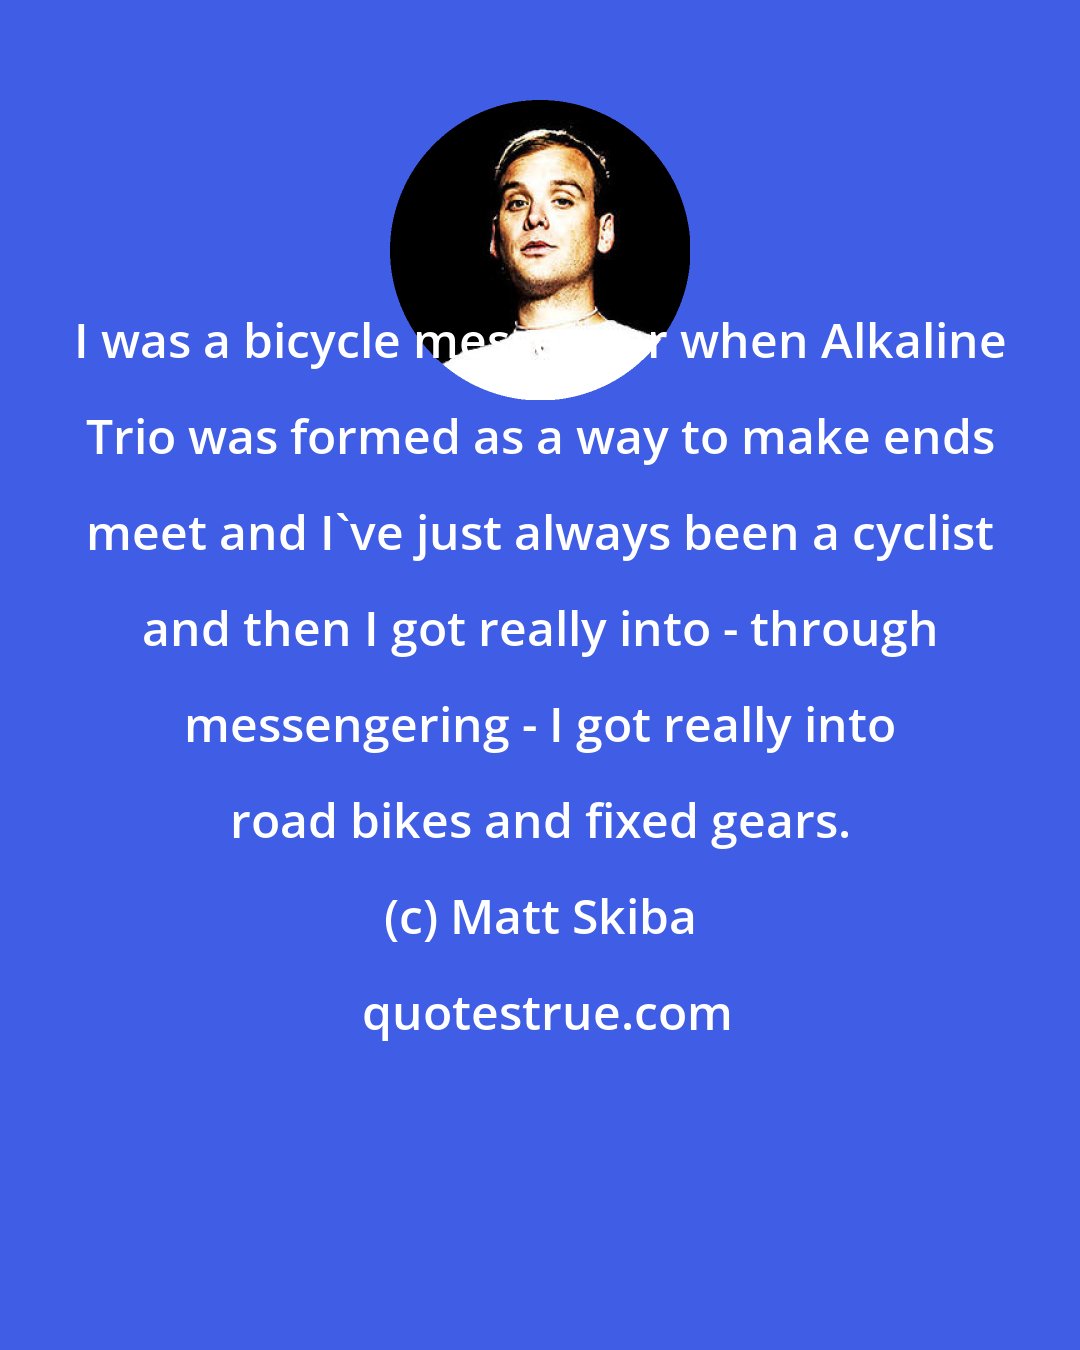 Matt Skiba: I was a bicycle messenger when Alkaline Trio was formed as a way to make ends meet and I've just always been a cyclist and then I got really into - through messengering - I got really into road bikes and fixed gears.